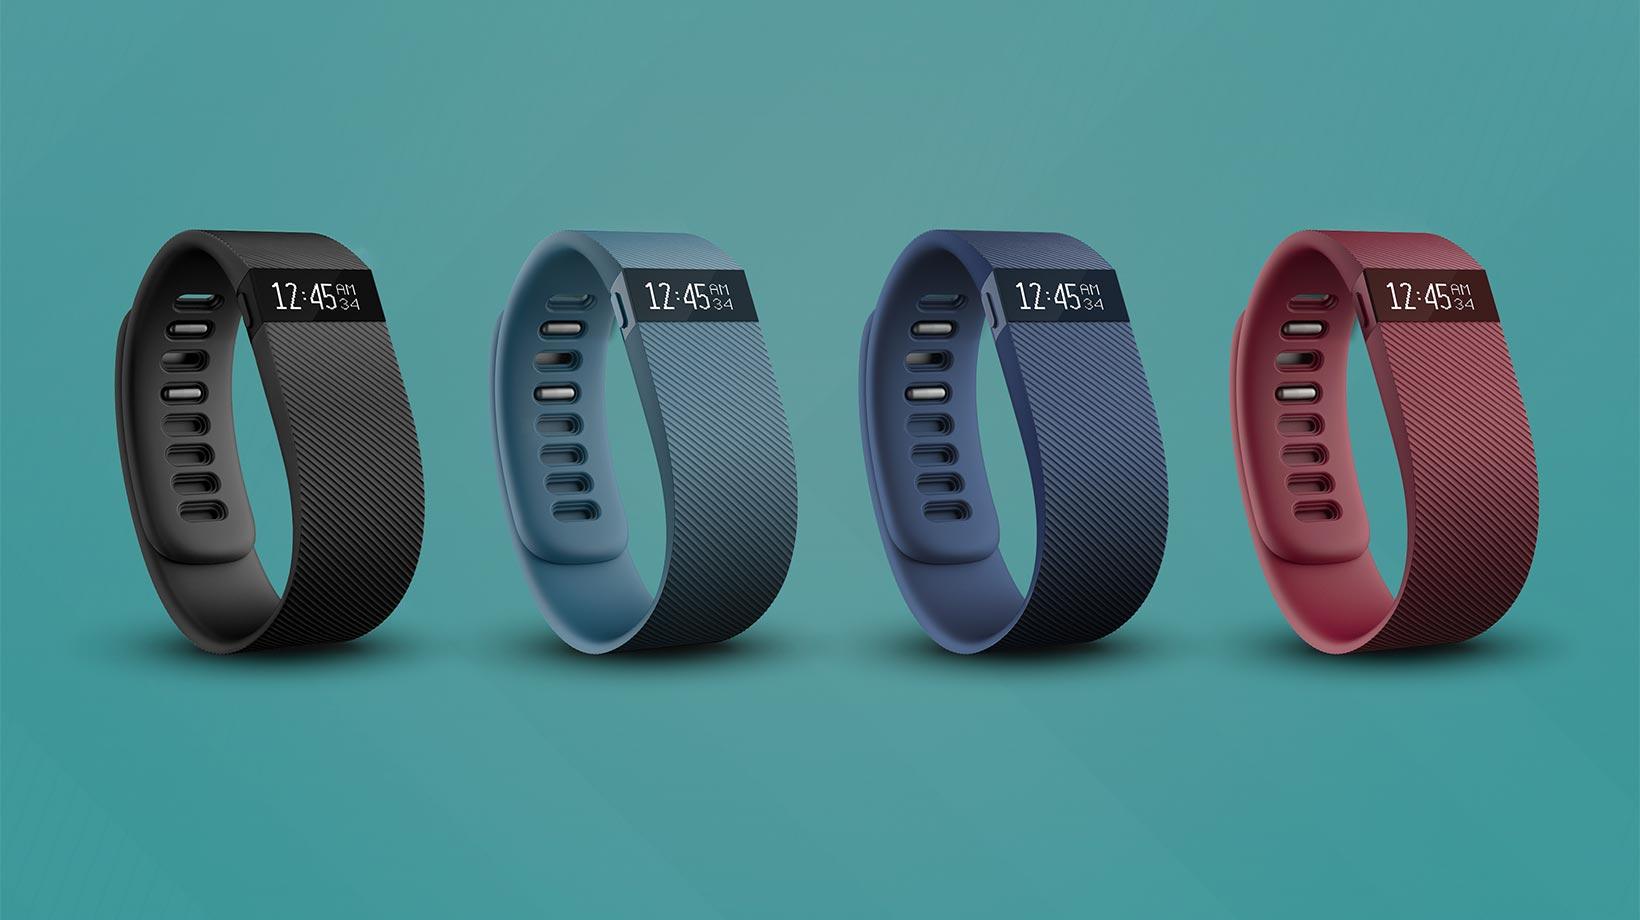 FITBIT CHARGE Photo, Image and Wallpaper